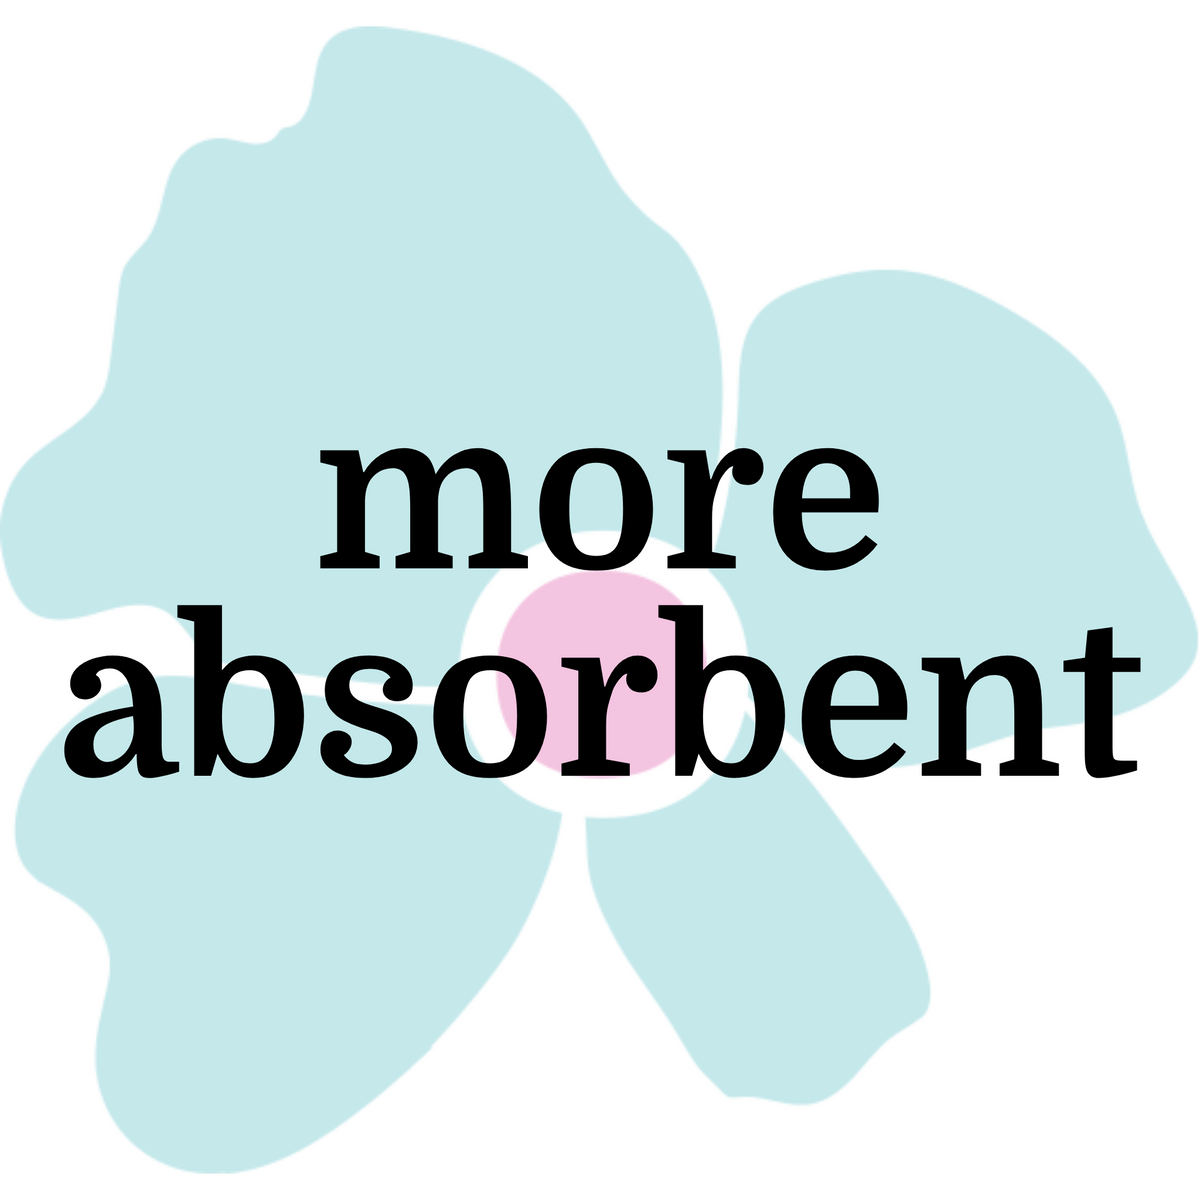 words more absorbent with a teal and pink flower